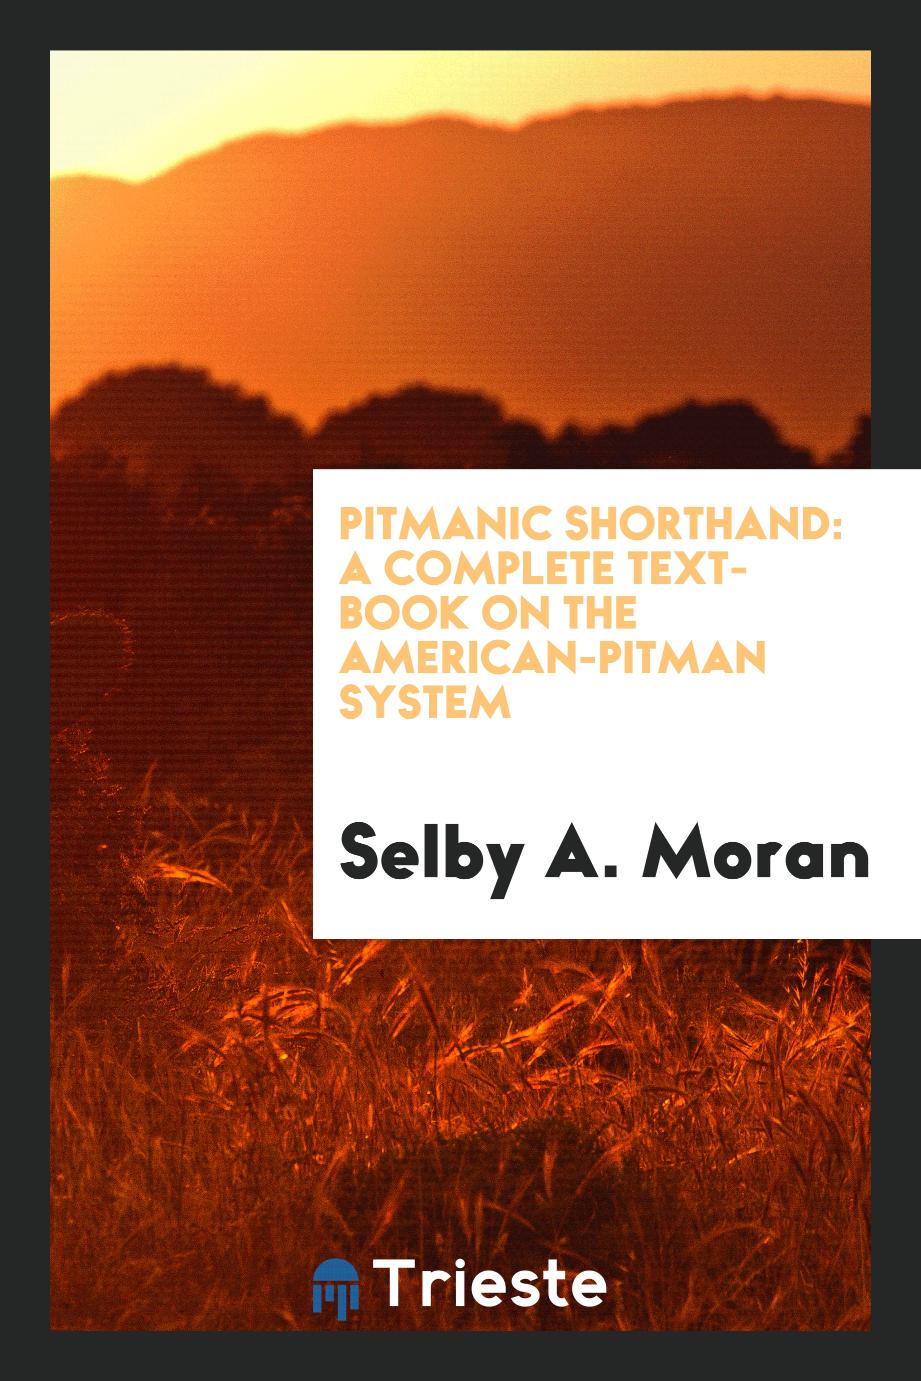 Pitmanic Shorthand: A Complete Text-book on the American-Pitman System